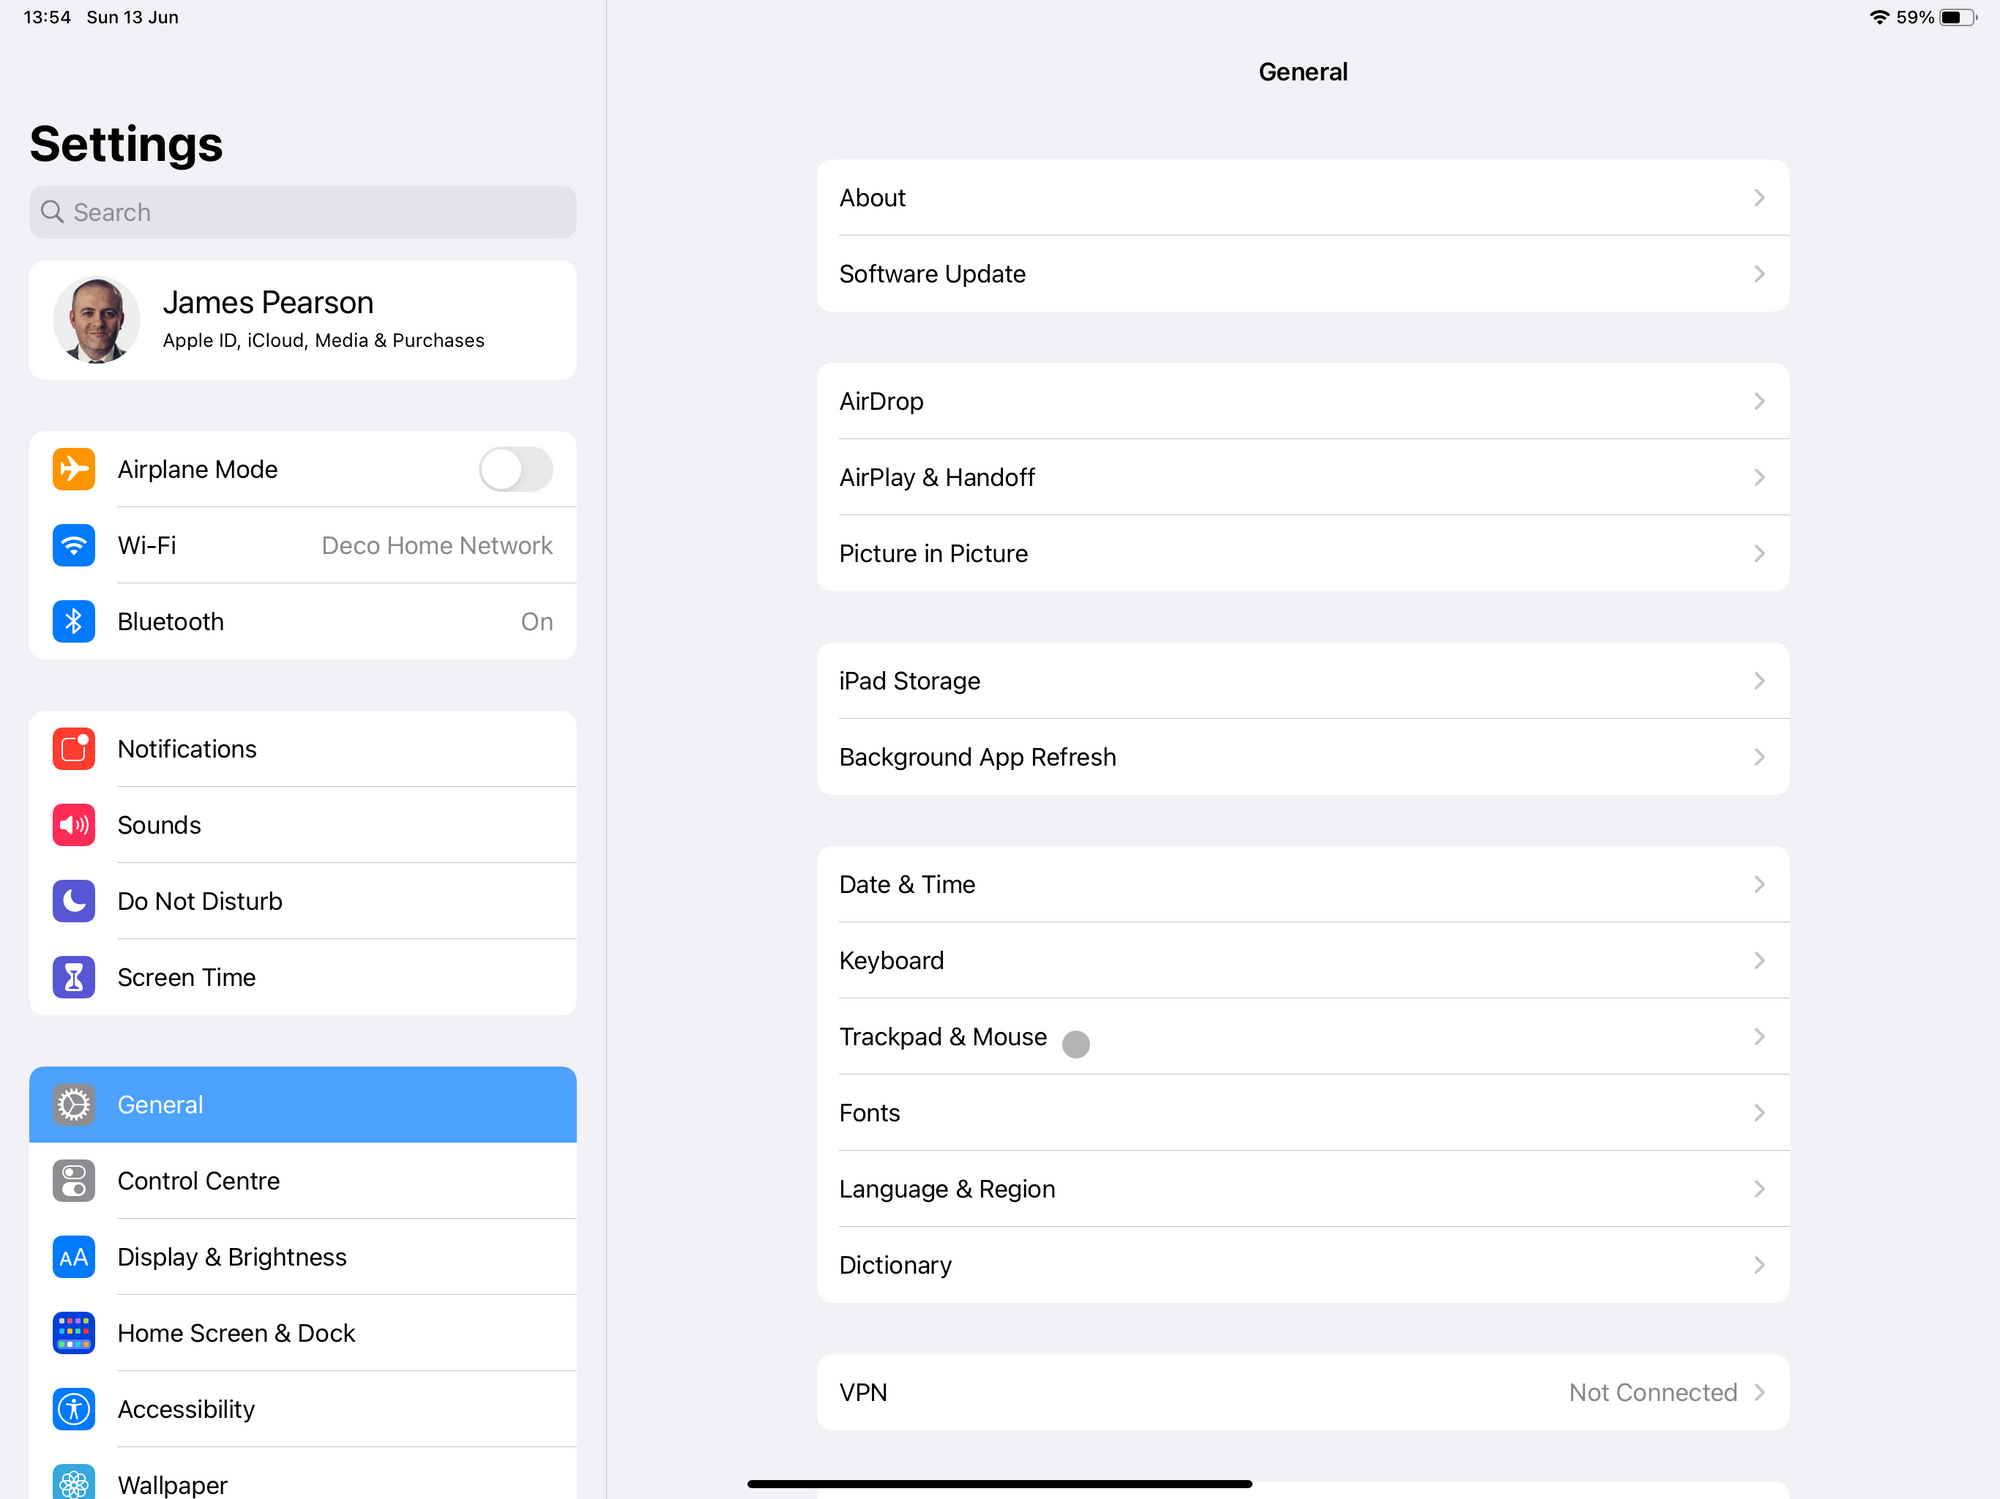 The Trackpad & Mouse category shown in the Settings app.